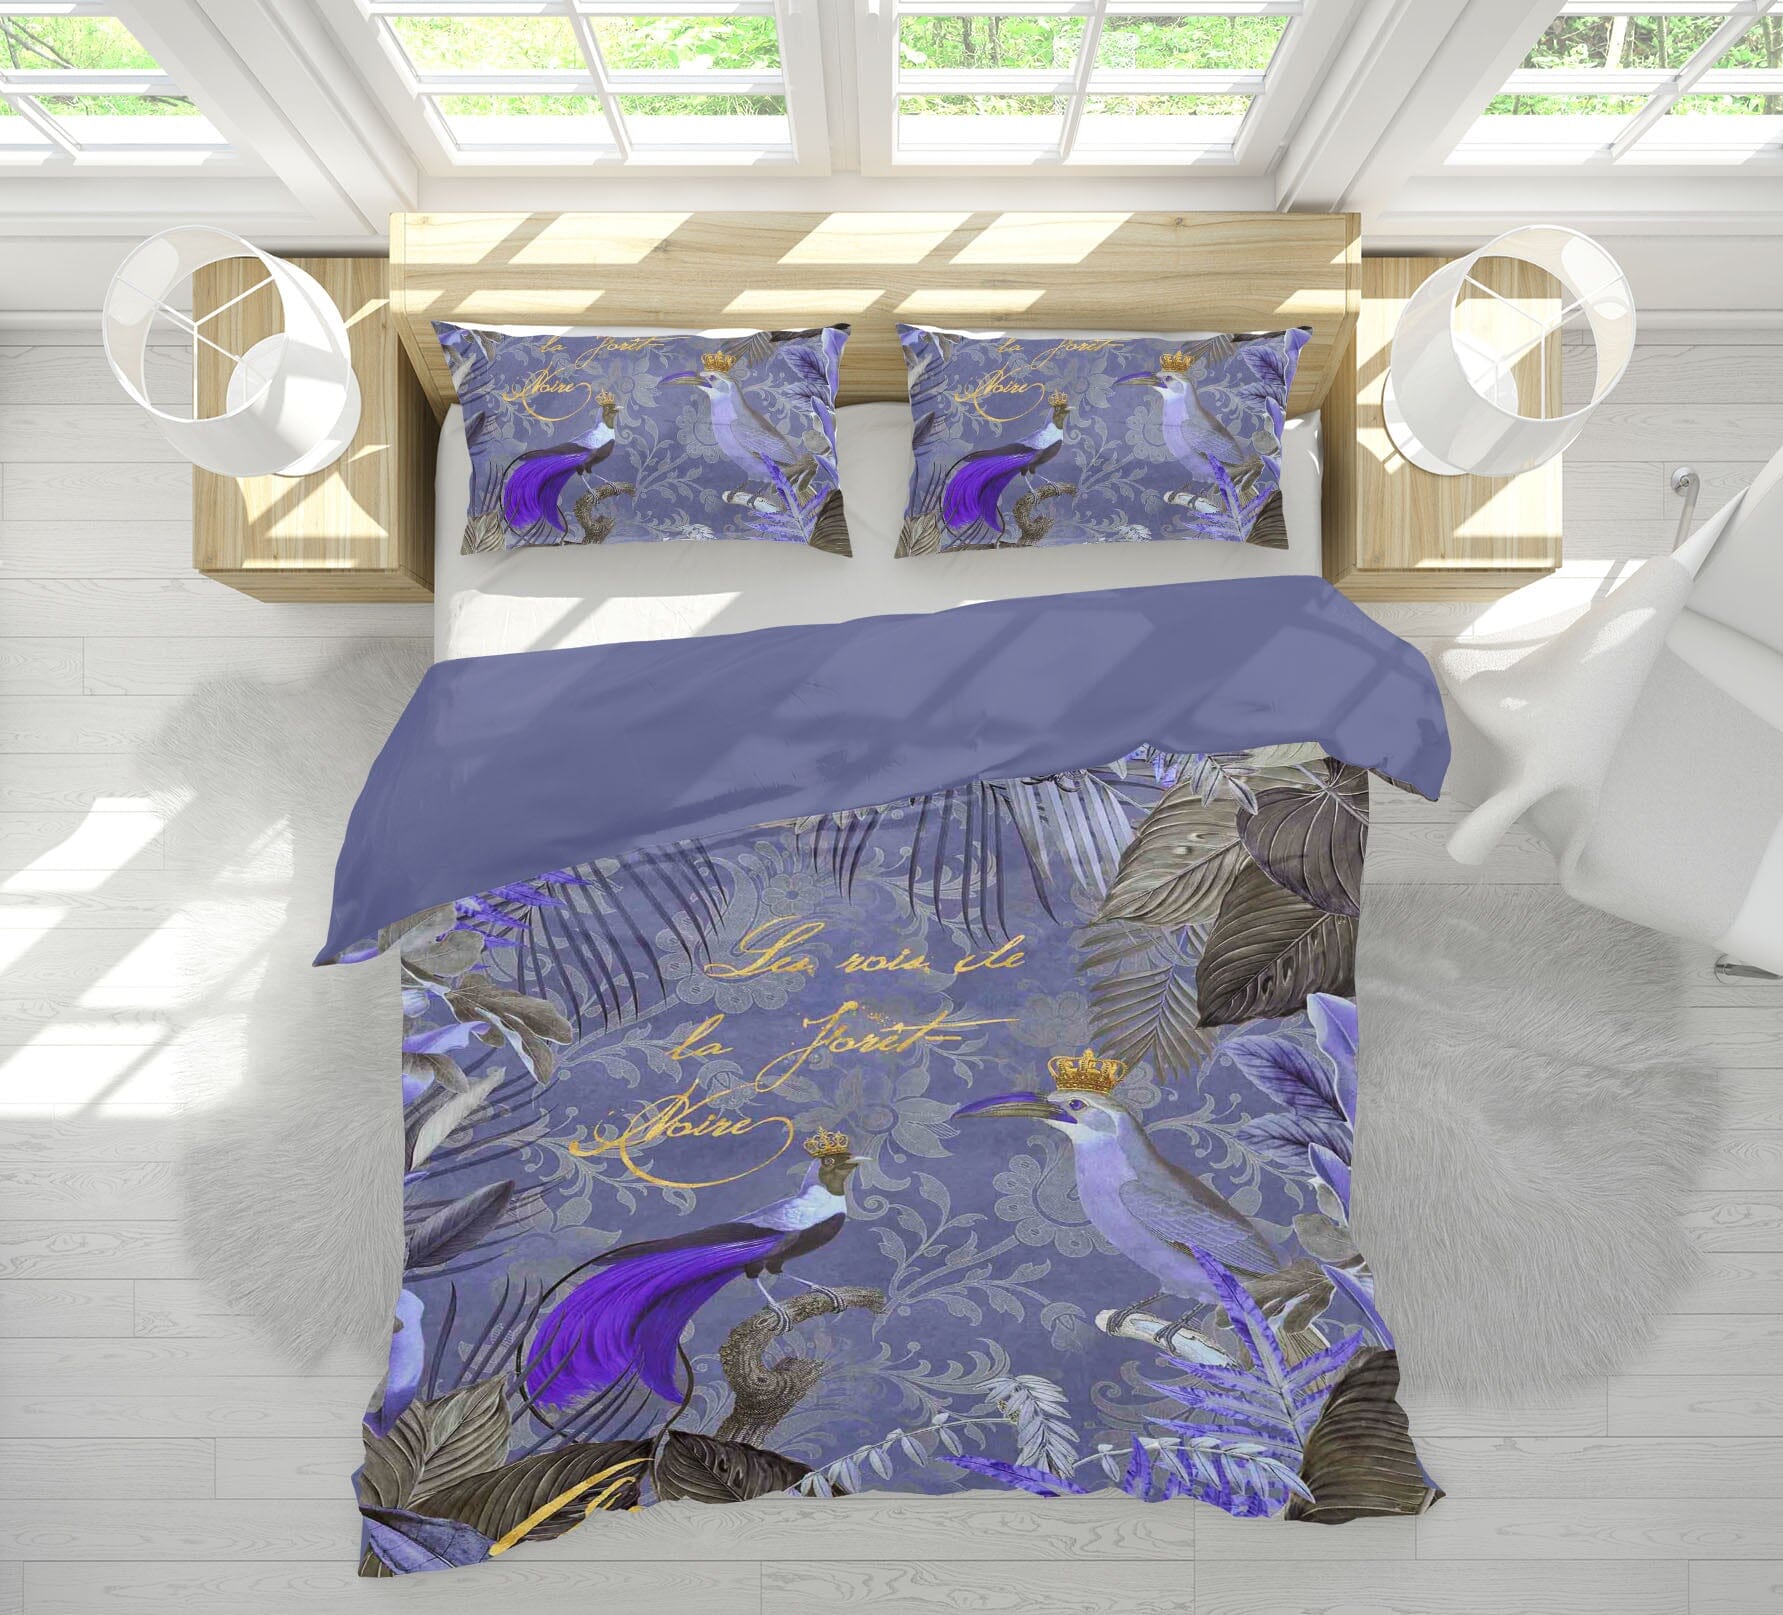 3D Kings Of The Jungle 2135 Andrea haase Bedding Bed Pillowcases Quilt Quiet Covers AJ Creativity Home 